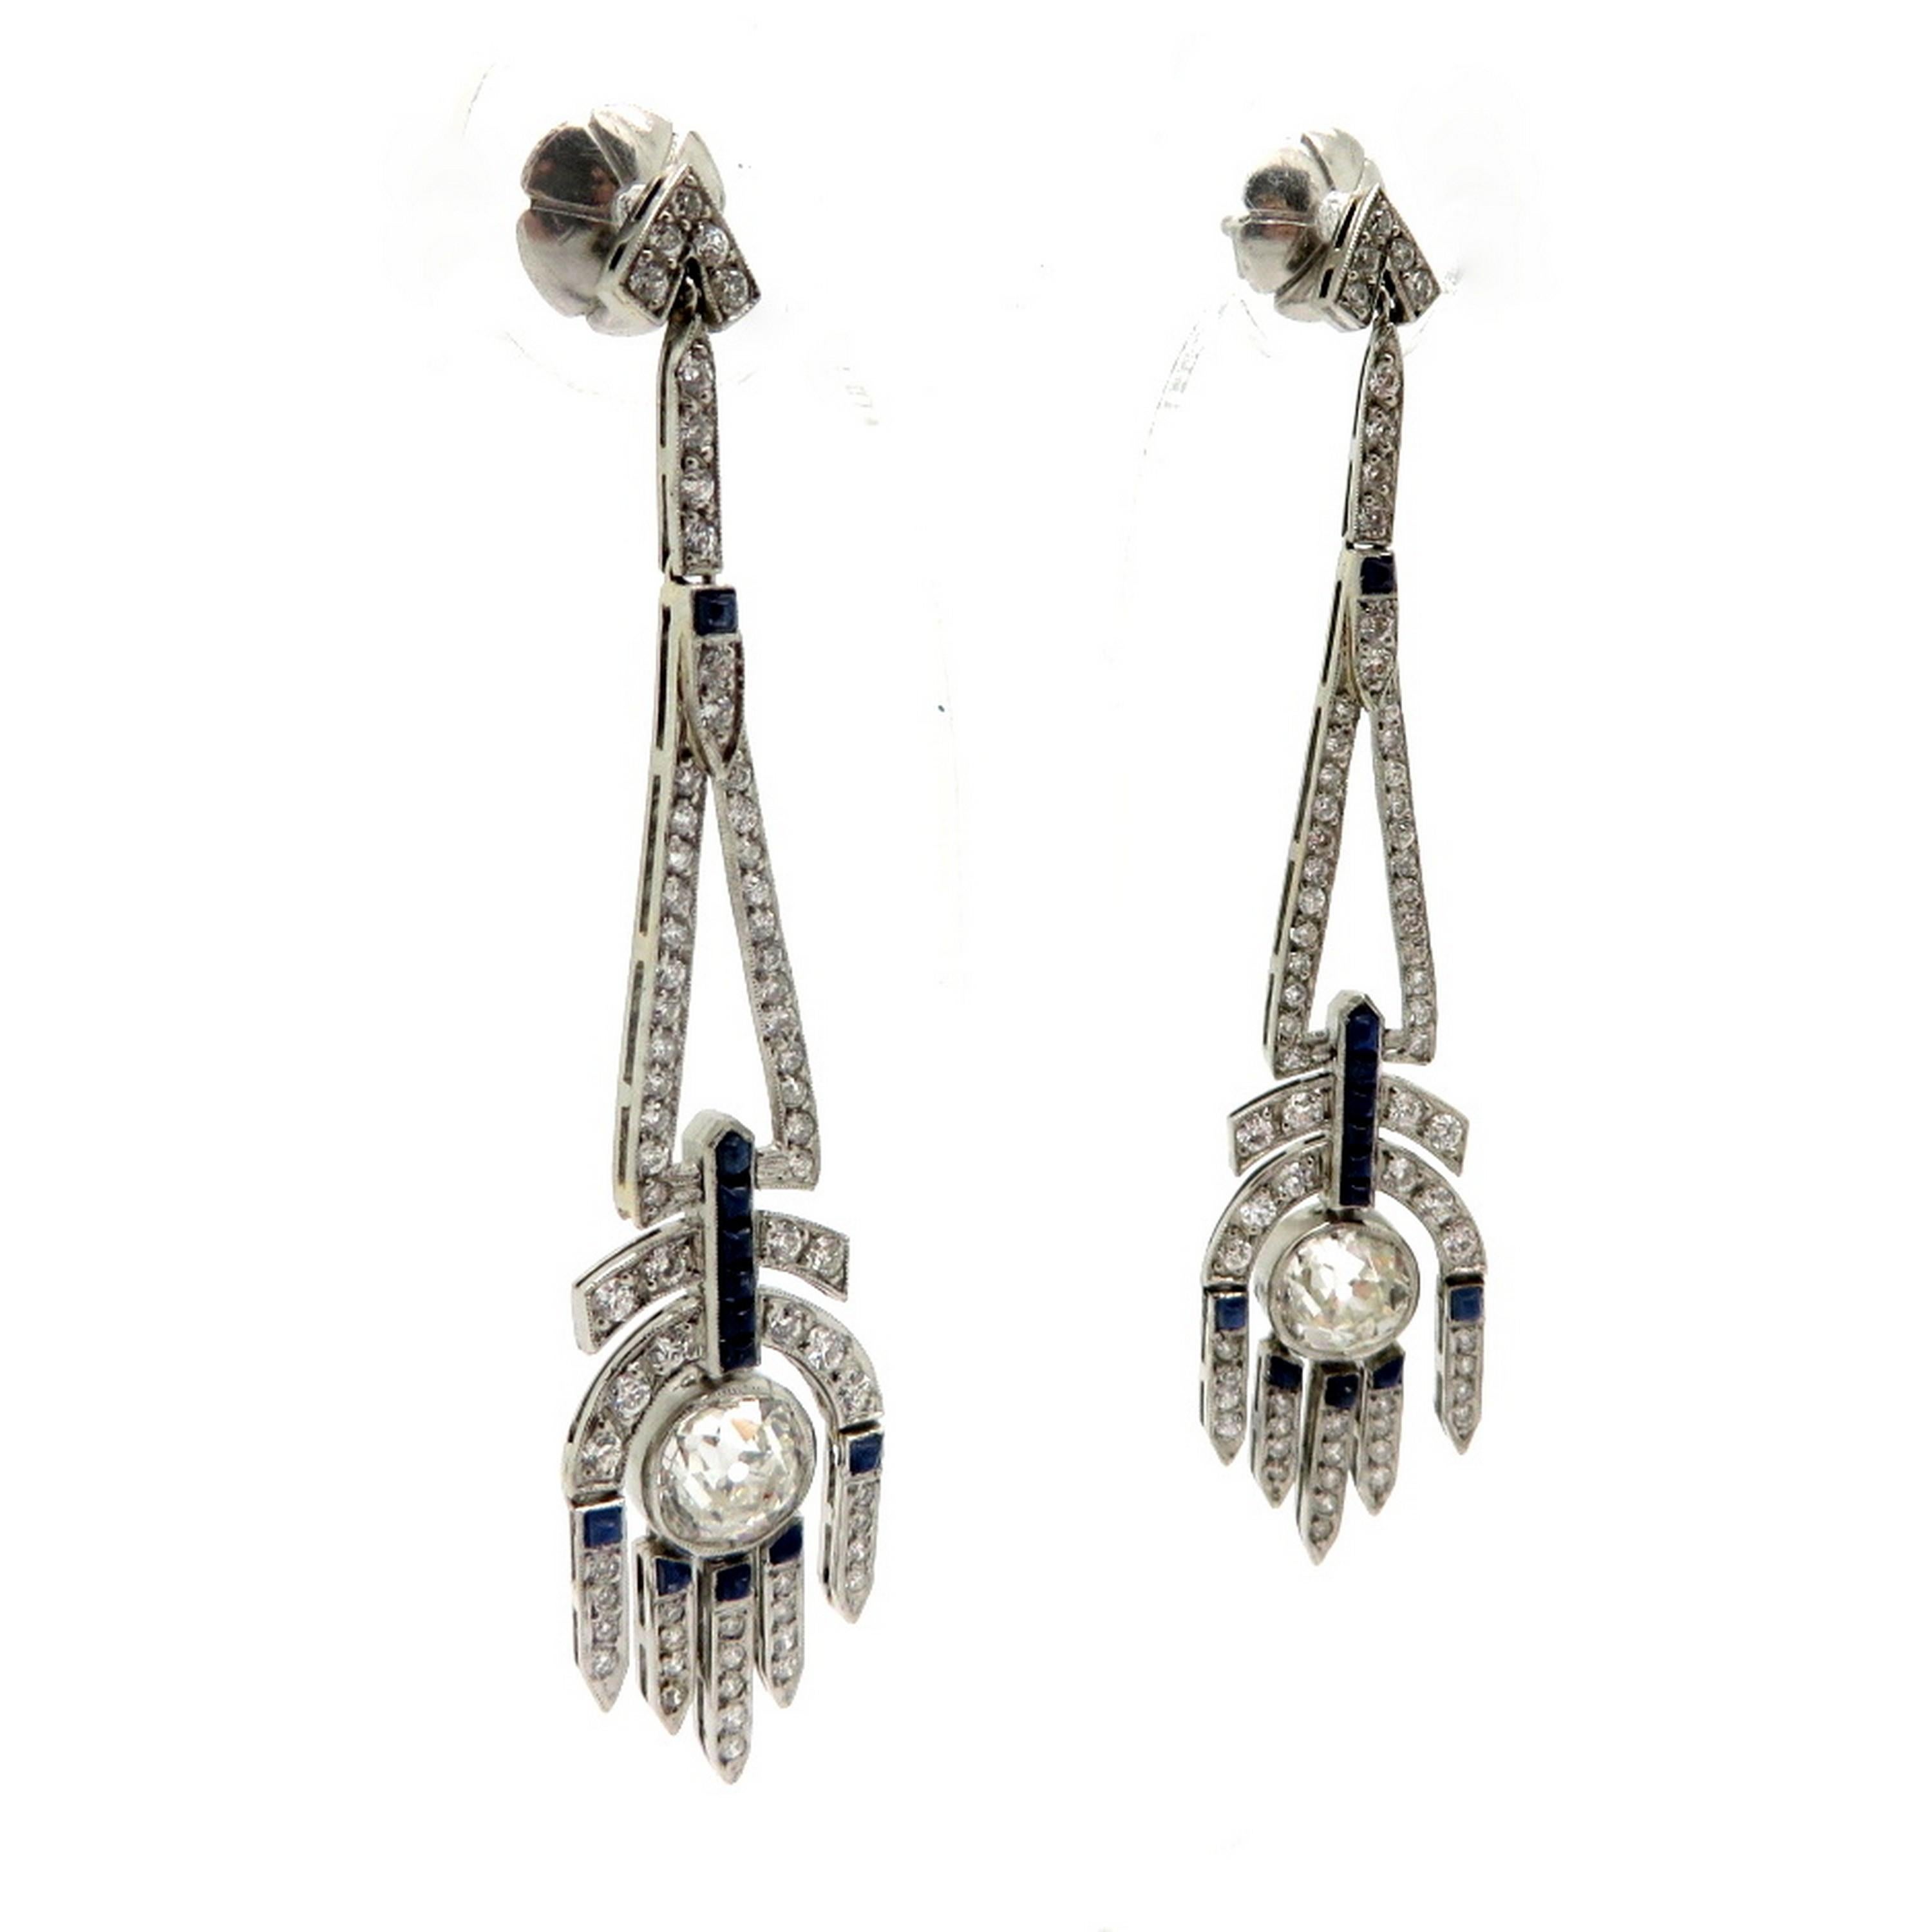 Platinum Art Deco style Old mine cut diamond and sapphire dangle earrings. Showcasing 2 Old Mine cut diamonds weighing a total of 2.20 carats. Diamond grading: color grade: H. Clarity grade: SI1. Interspersed with 132 Old European cut diamonds